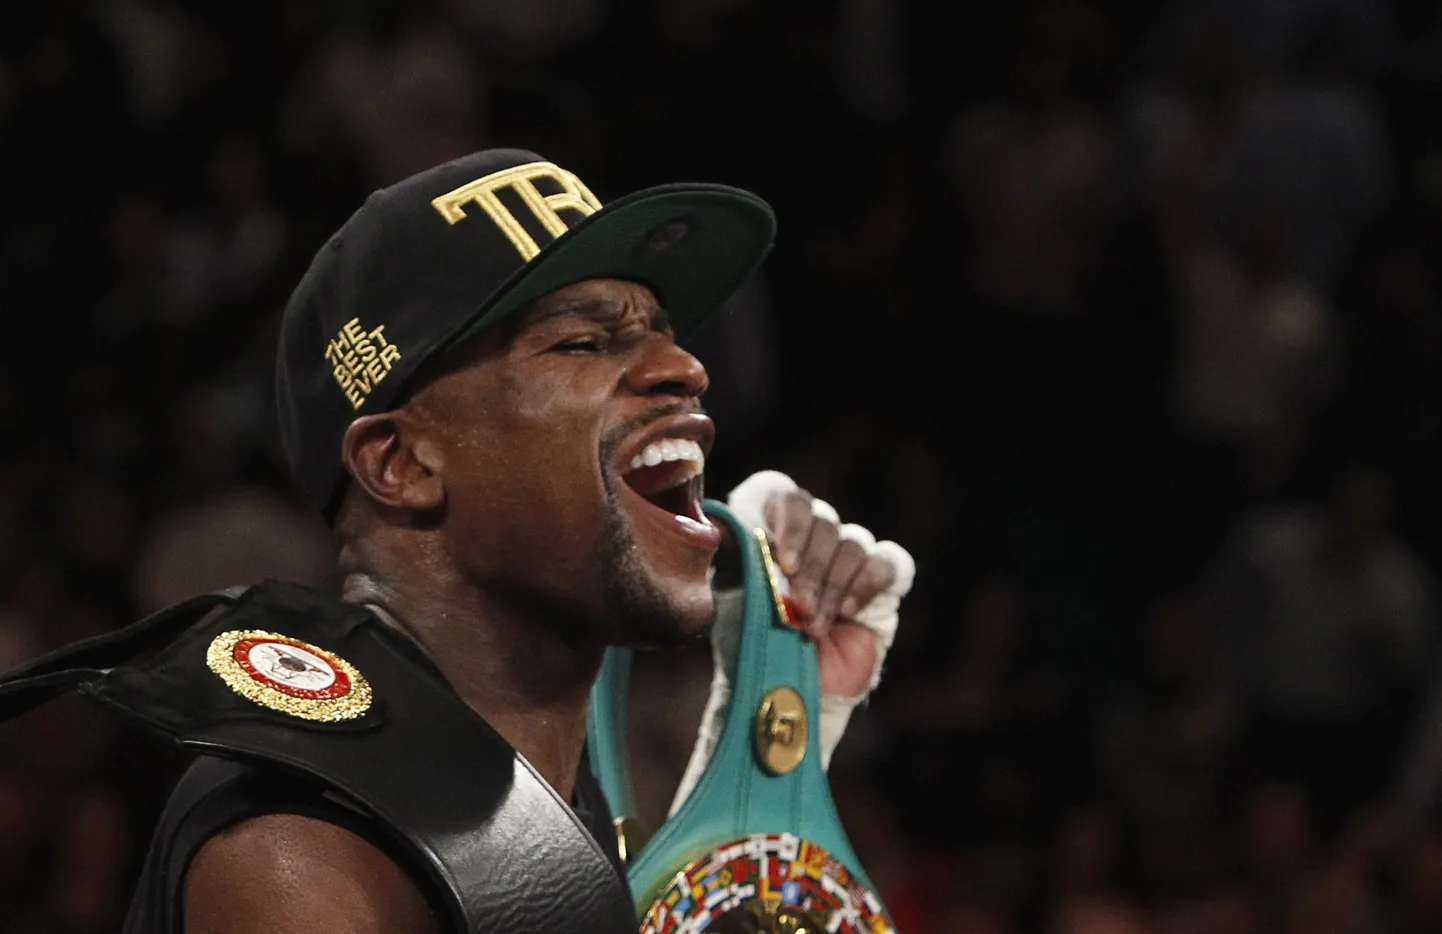 Floyd Mayweather Jr. of the U.S. celebrates his victory over WBC/WBA 154-pound champion Canelo Alvarez at the MGM Grand Garden Arena in Las Vegas, Nevada, September 14, 2013. Alvarez was previously undefeated in 42 fights. REUTERS/Steve Marcus (UNITED STATES - Tags: SPORT BOXING TPX IMAGES OF THE DAY)